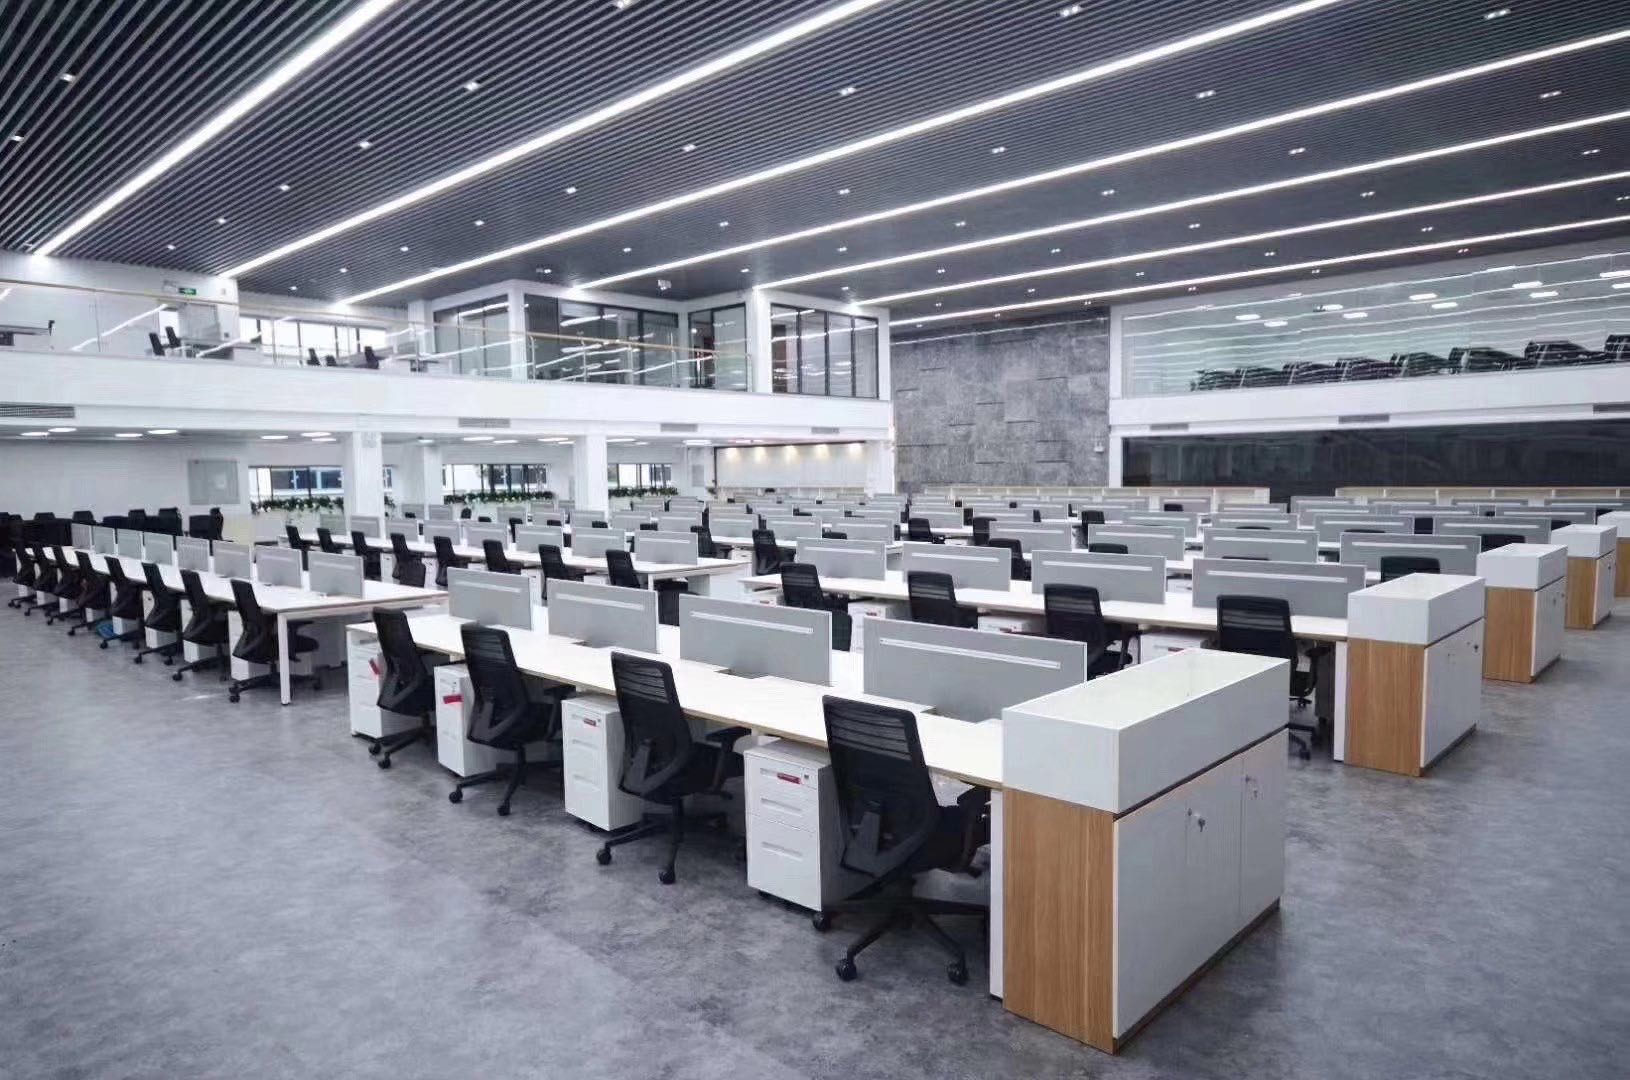 news-GOJO-Want High-Efficiency at Work Orderly Arranged Modular Workstation Furniture Plays Big Role